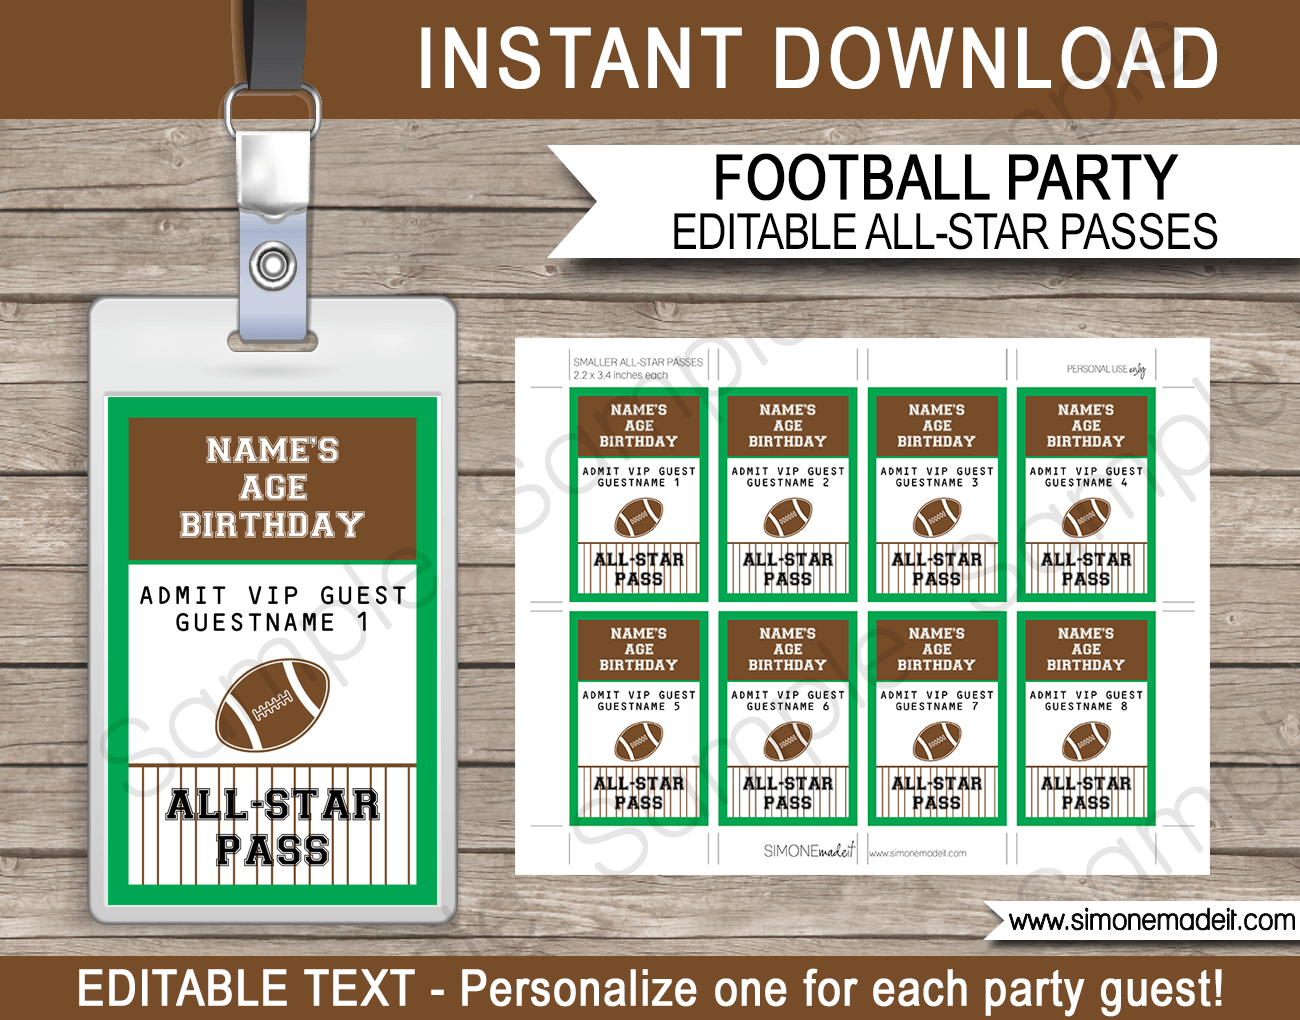 Football Party All Star VIP Passes | Printable Badges | Party Favors | Birthday Party | Editable DIY Template | $3.50 INSTANT DOWNLOAD via SIMONEmadeit.com